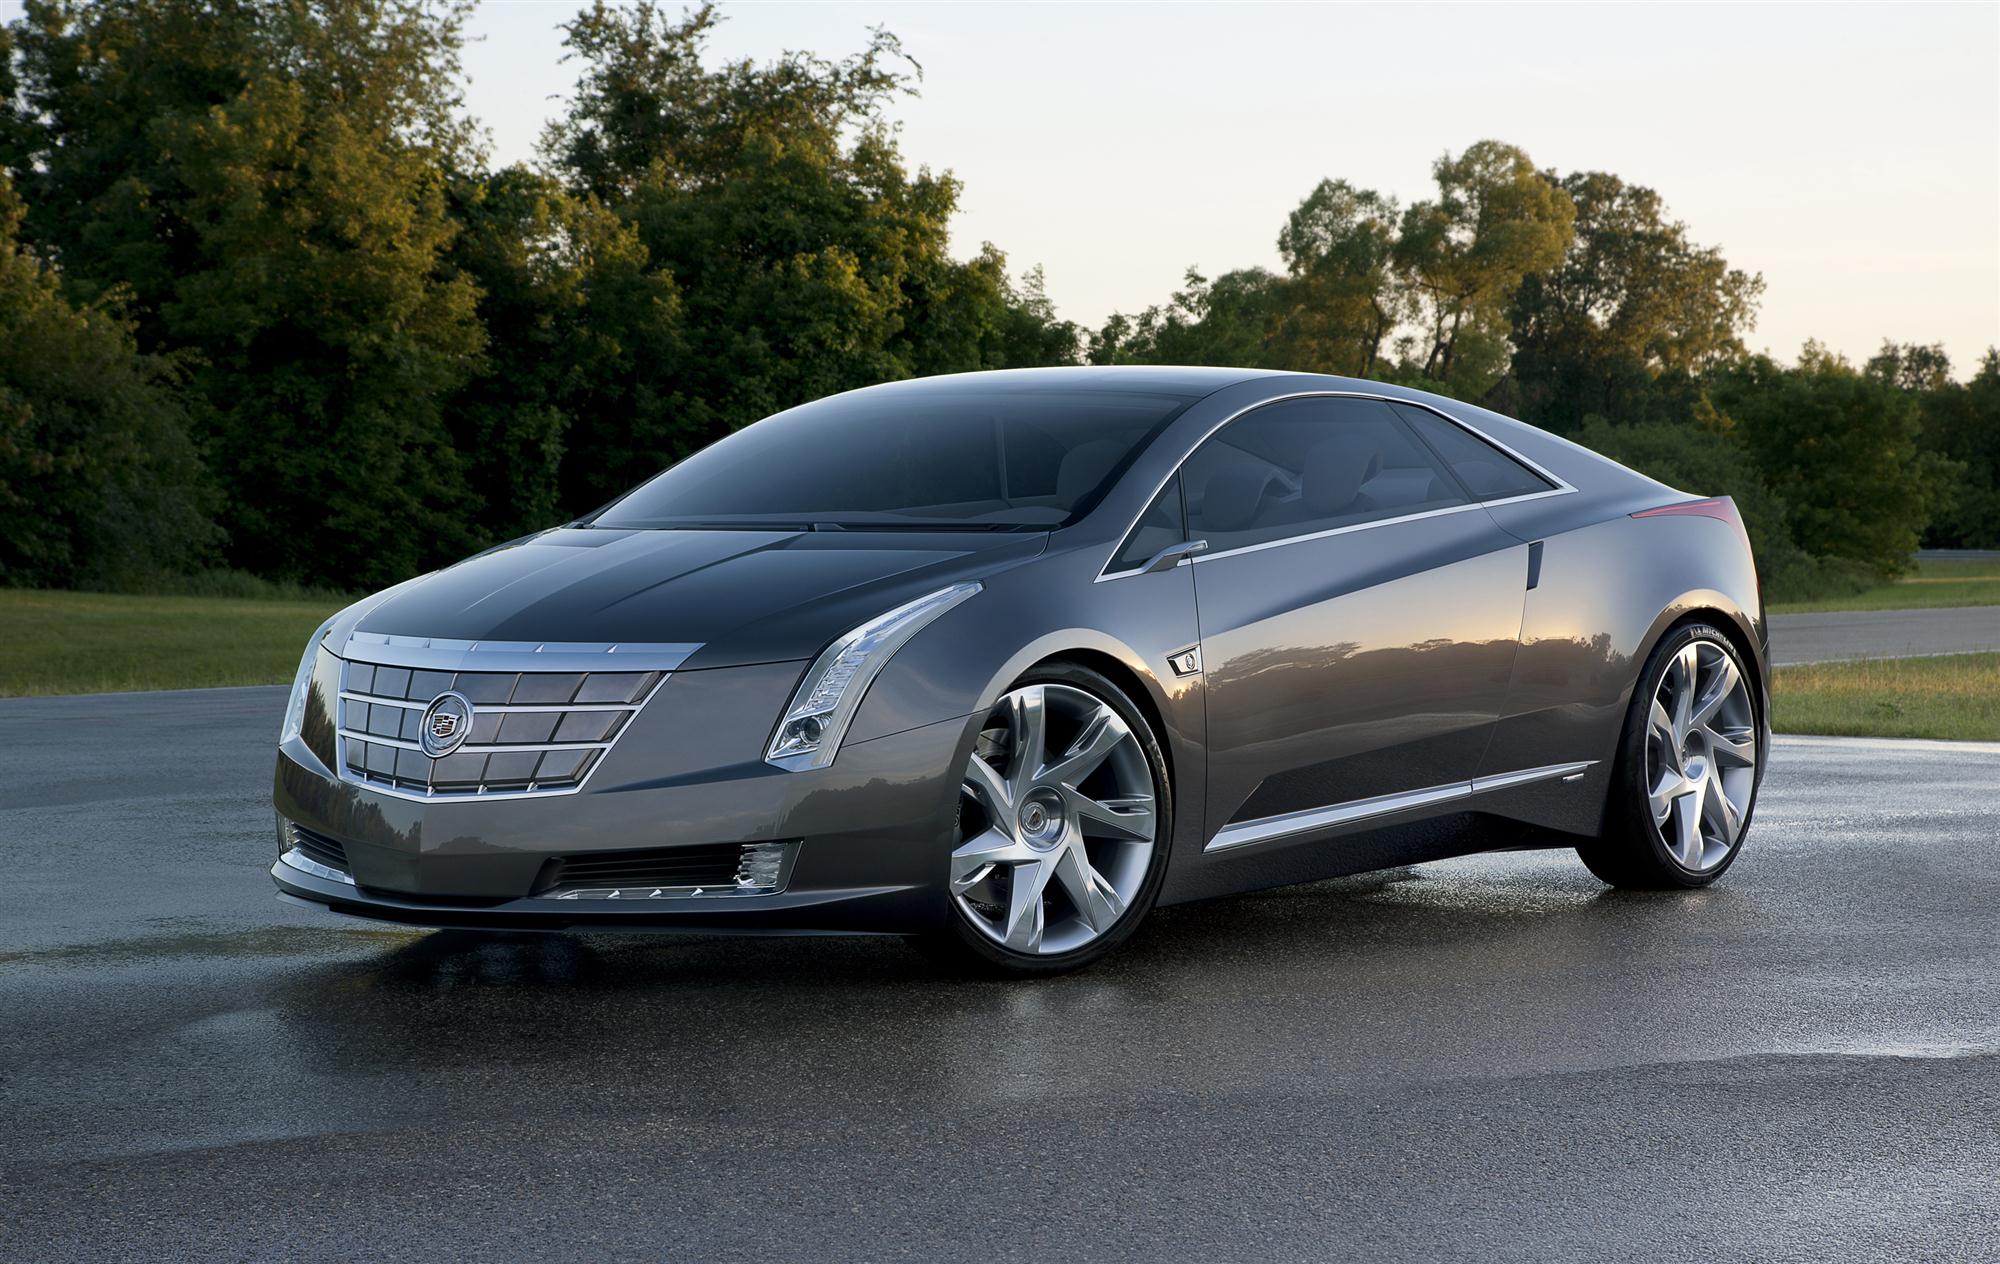 New Details On Cadillac ELR ExtendedRange Electric Car